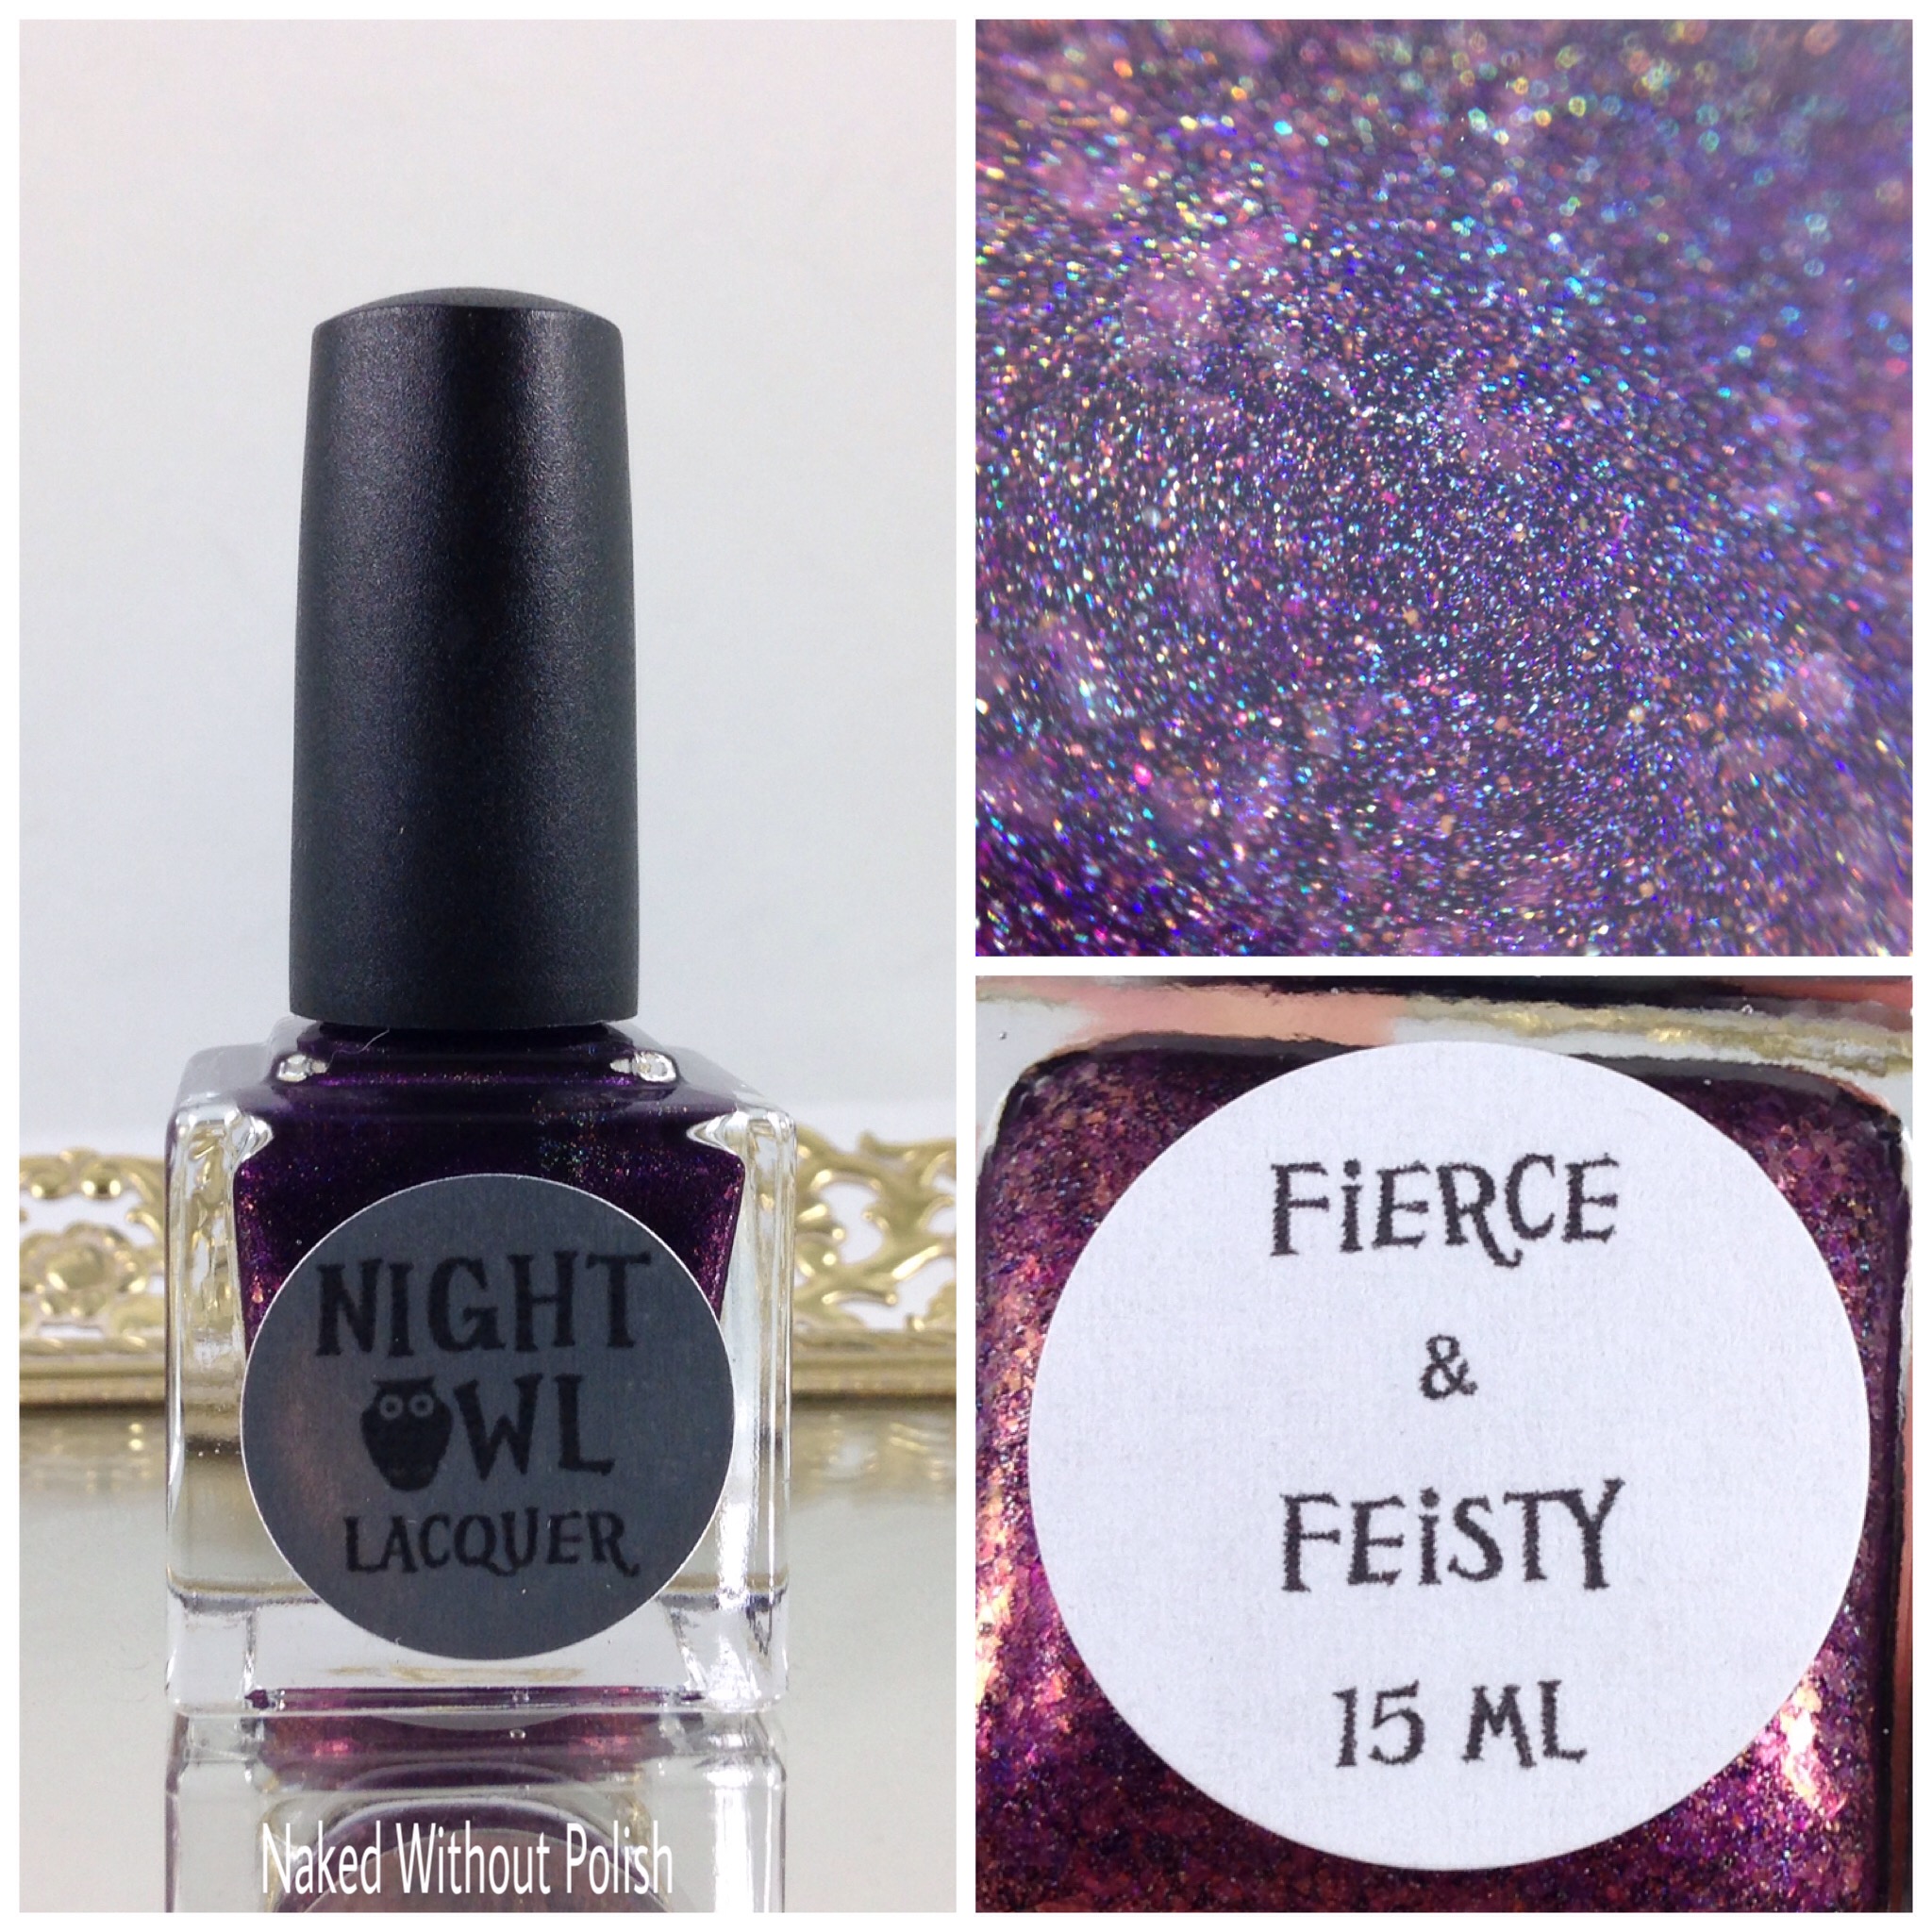 Polish-Pickup-Night-Owl-Lacquer-Fierce-and-Feisty-1